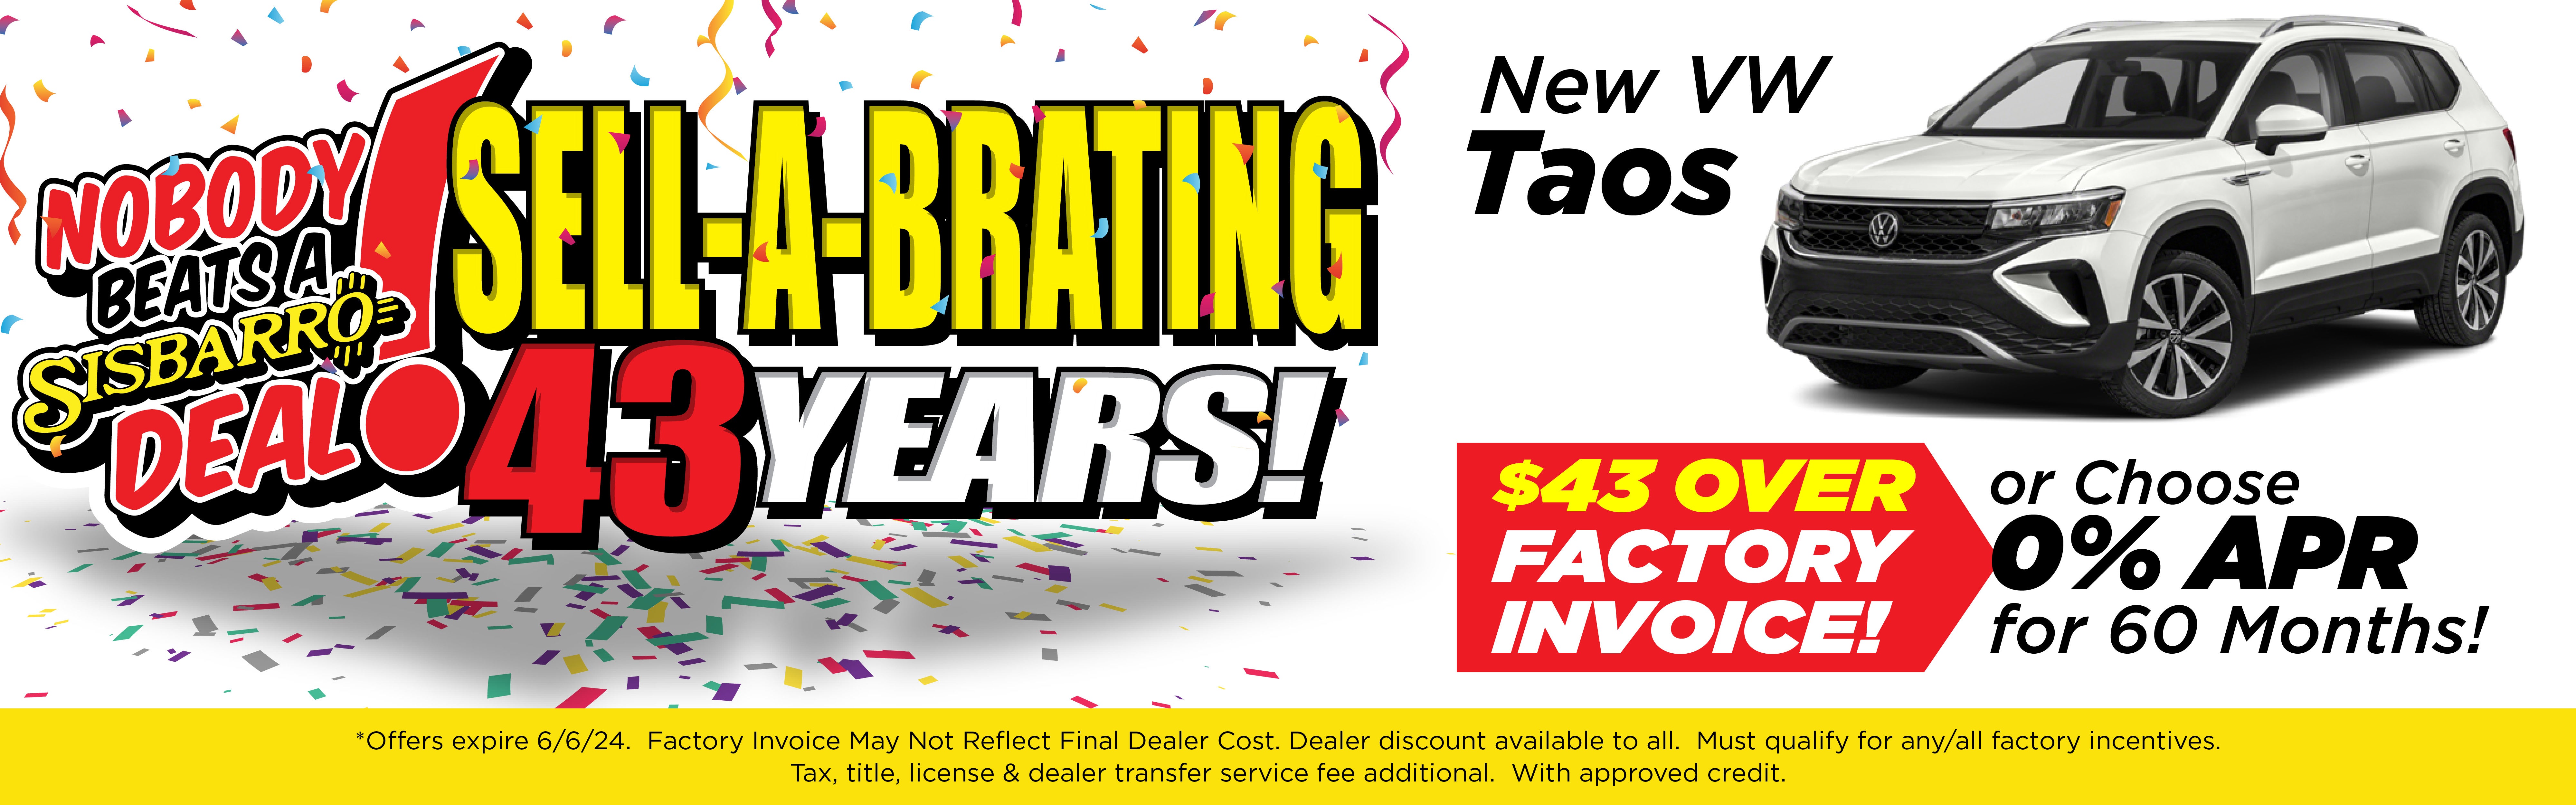 New VW Taos $43 Over Factory Invoice OR 0% APR 60 months